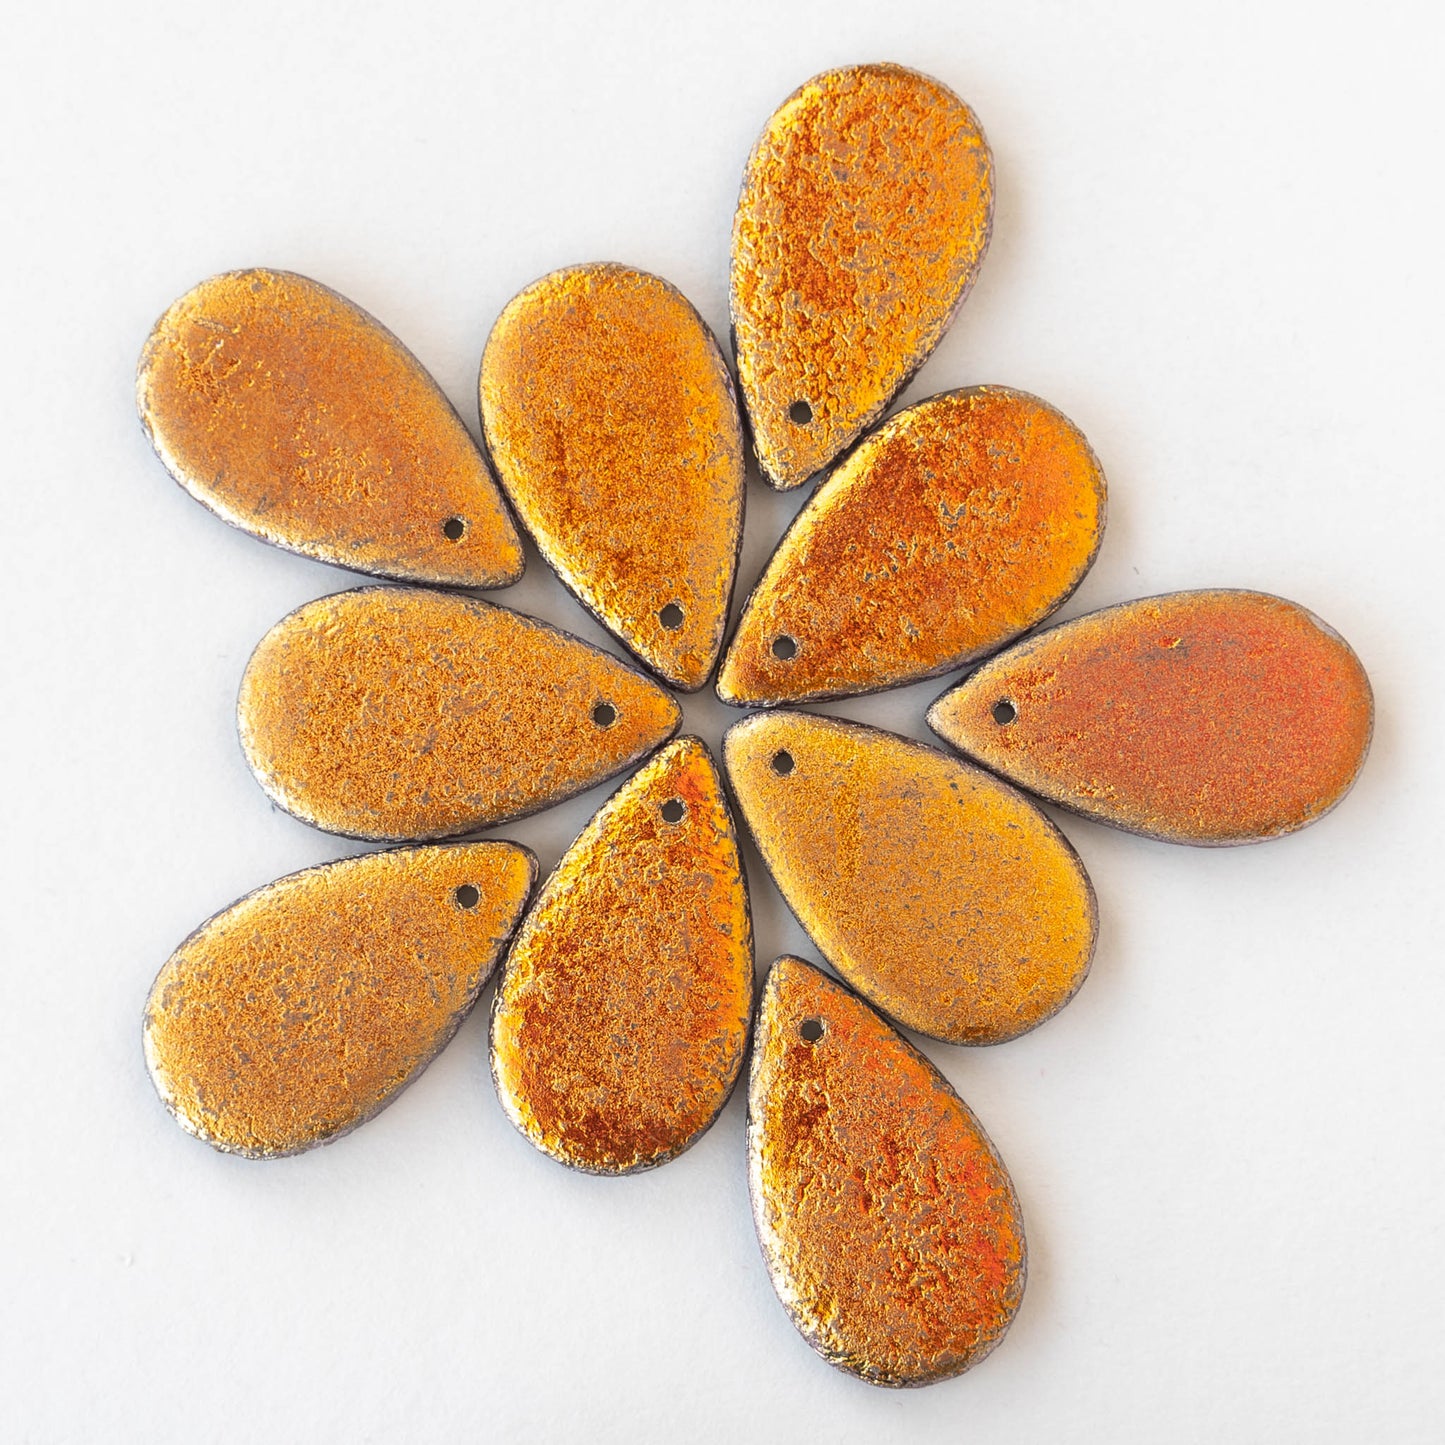 30x18mm Large Flat Teardrop Beads - Etched Flame Orange - 10 Beads